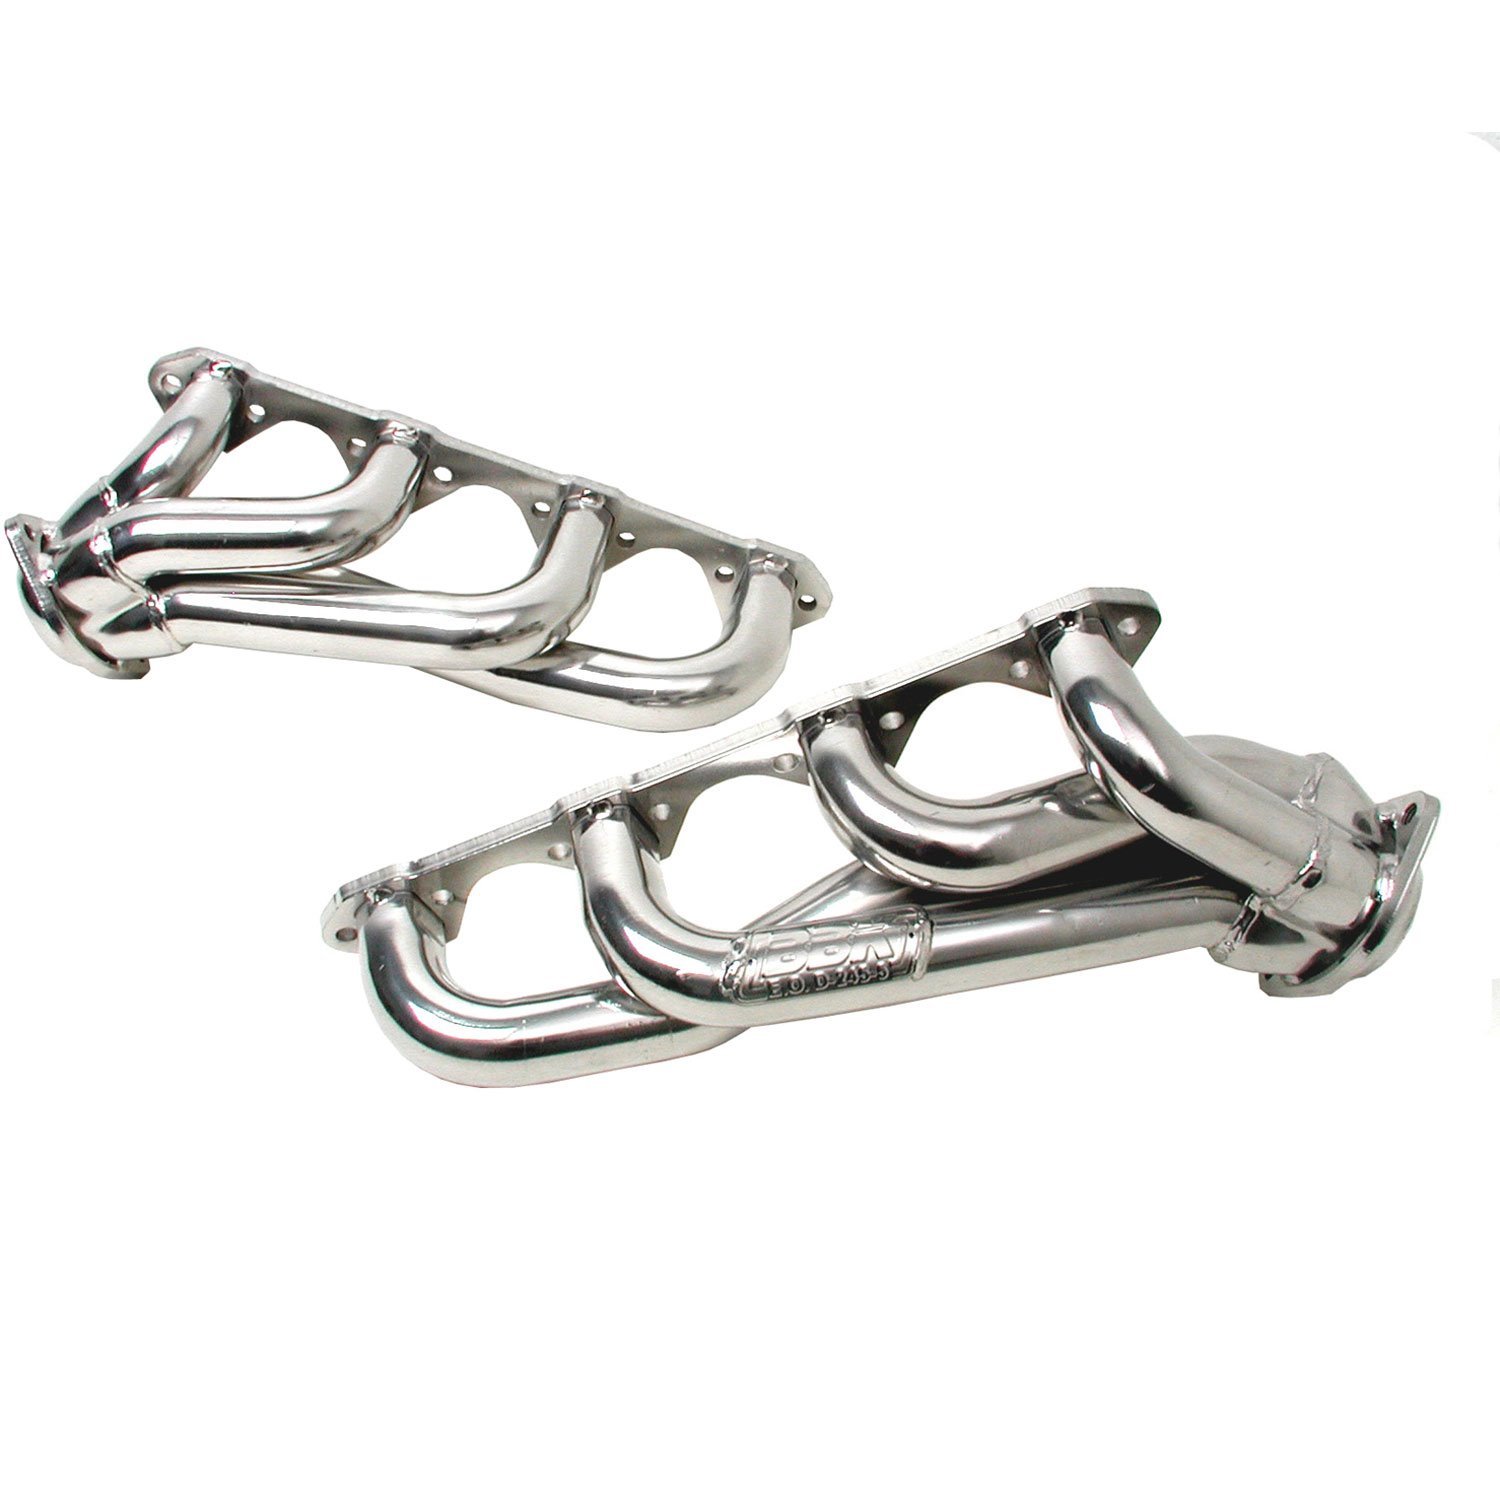 Unequal Length Shorty Headers 1979-1993 Ford Mustang 5.8L/351W